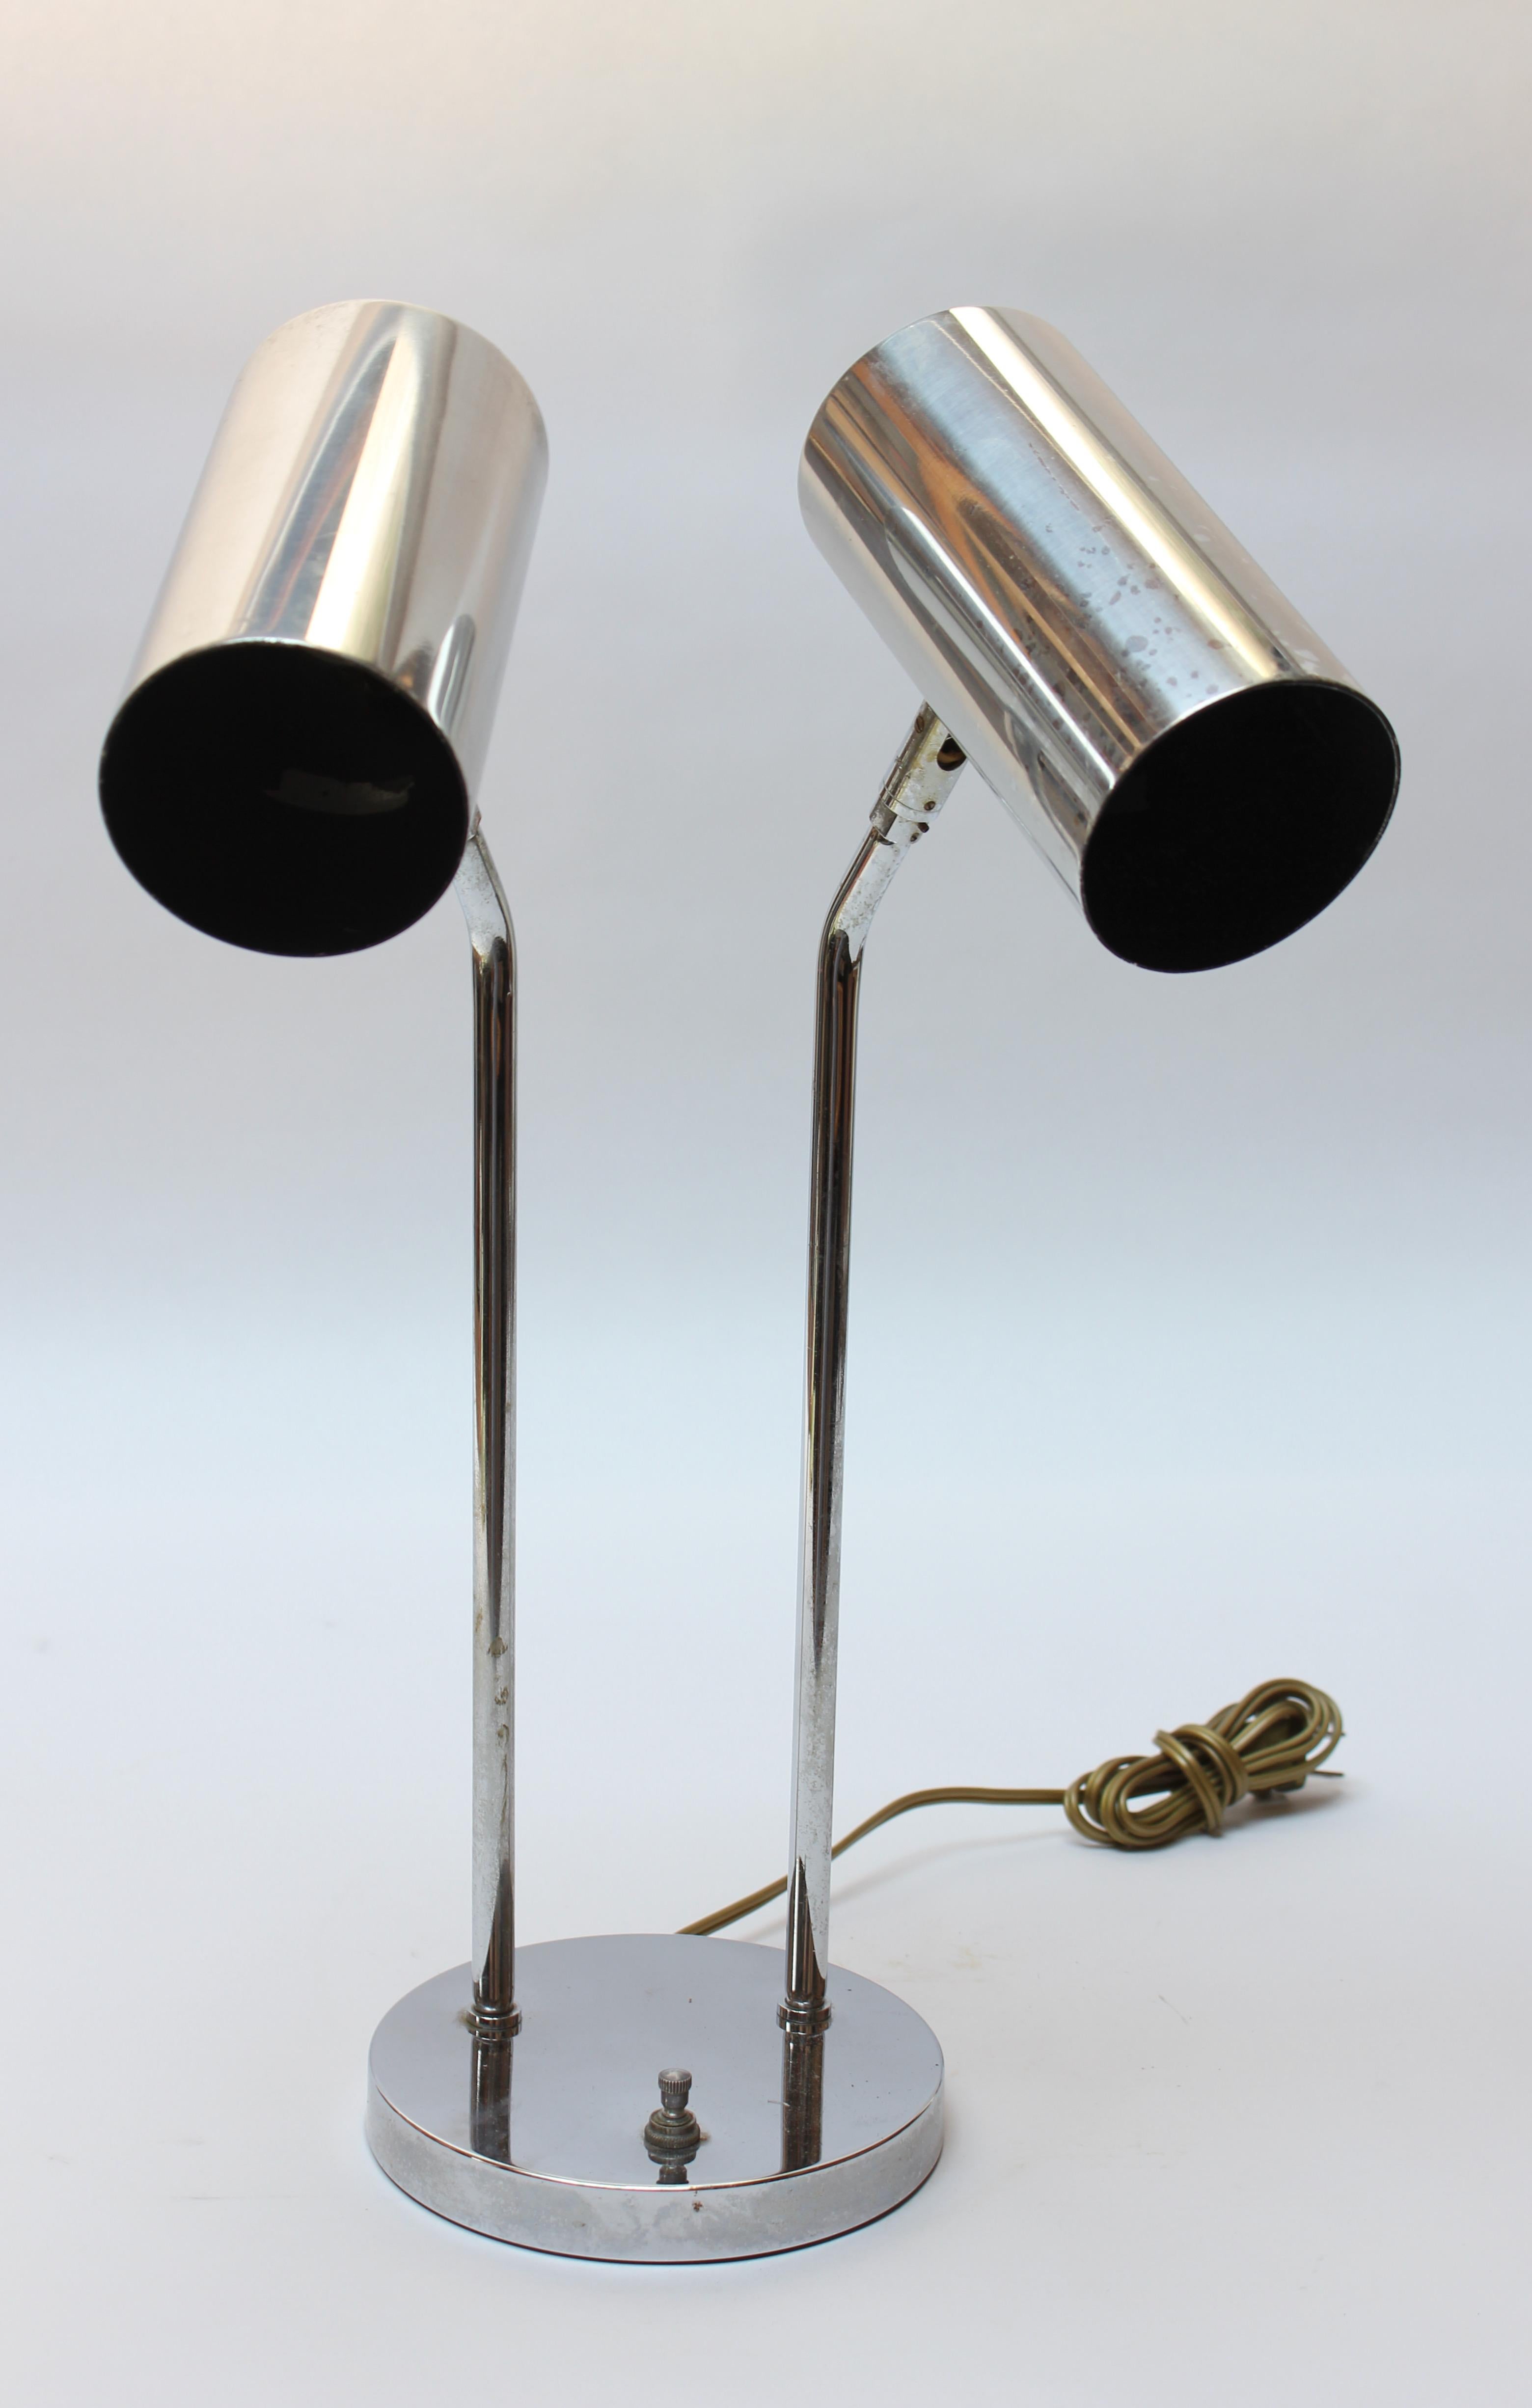 Chrome table lamp by Robert Sonneman for Koch & Lowy (ca. 1970s). Composed of two pivoting, cylindrical shades supported by tubular-chrome stems and a round base with a single on / off switch that allows for one or both of the lights to be on at a